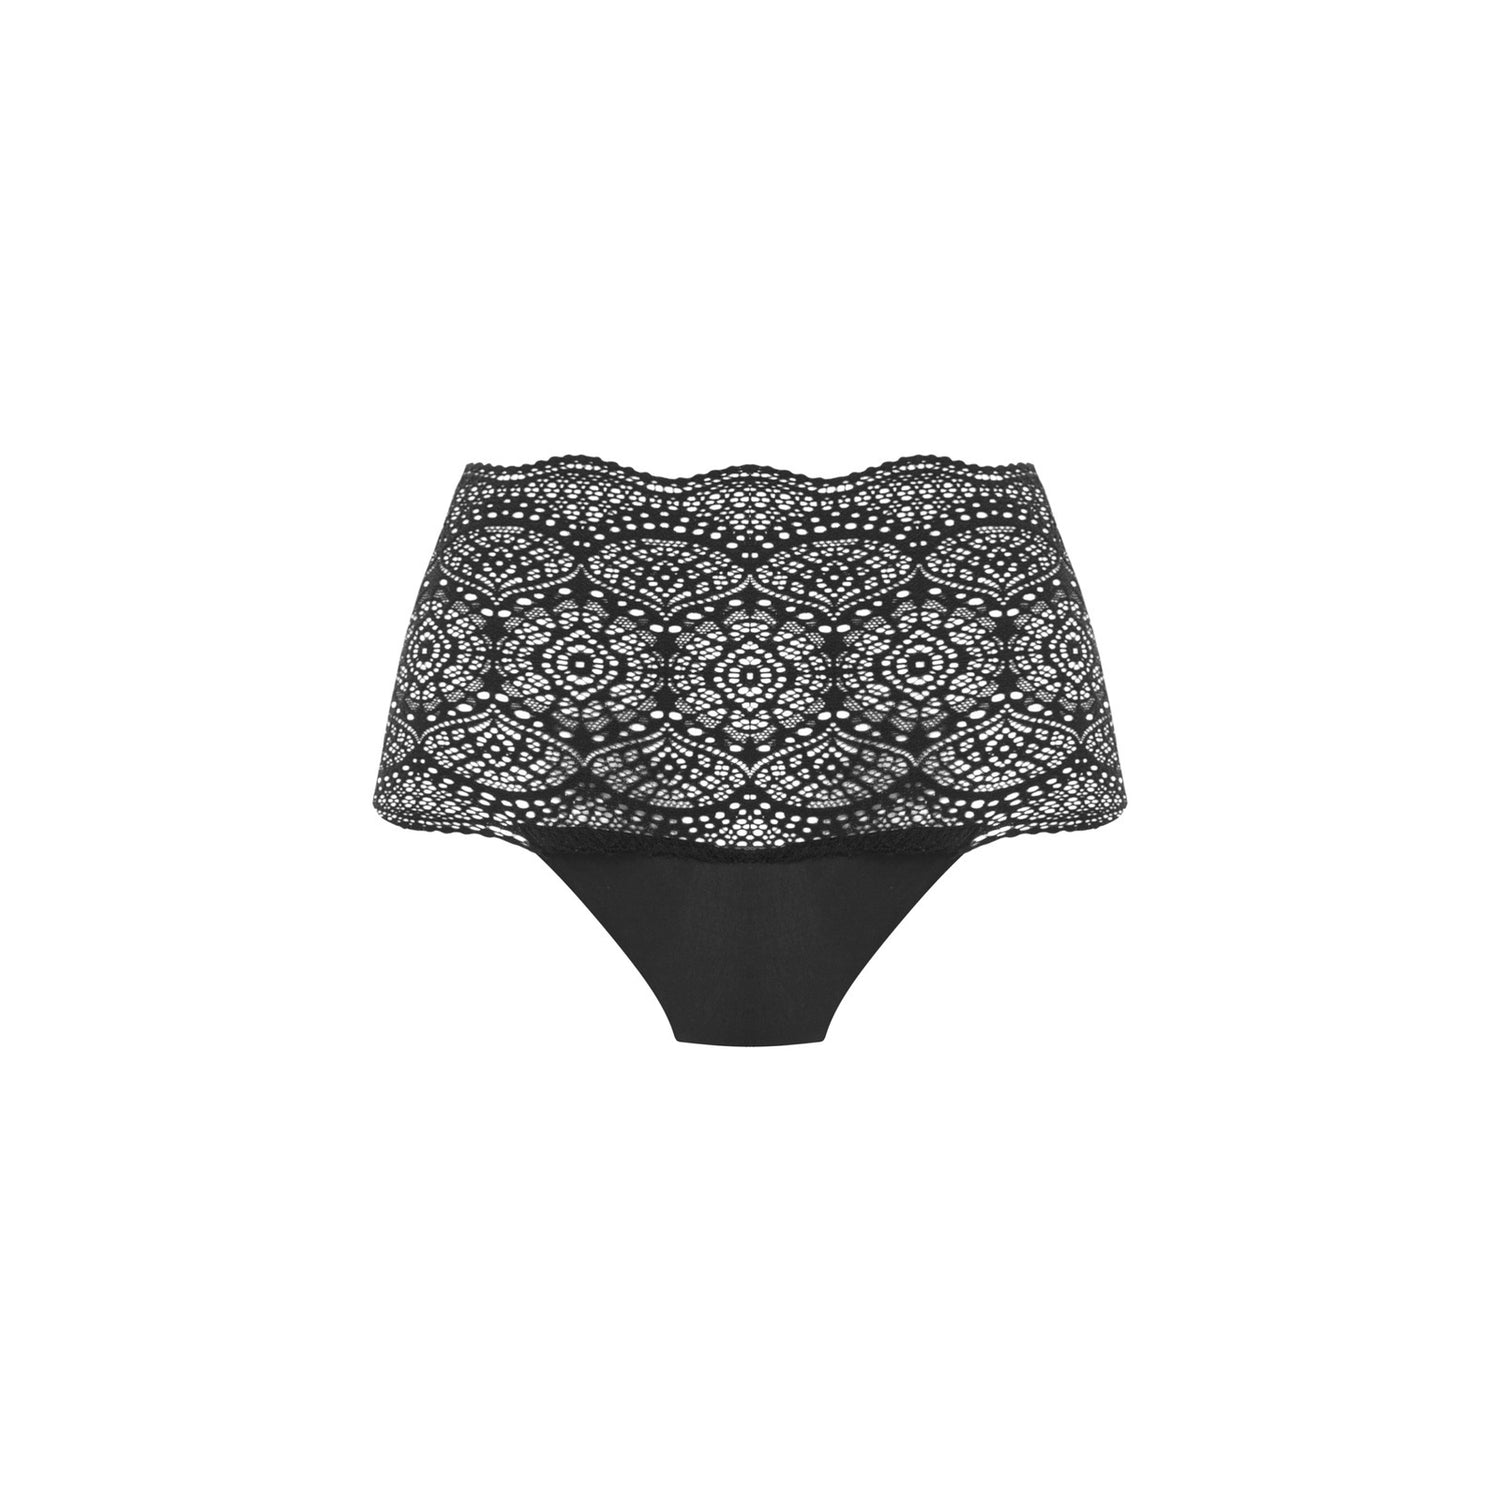 Fantasie Lace Ease Invisible Stretch Full Briefs - Black 2 Shaws Department Stores